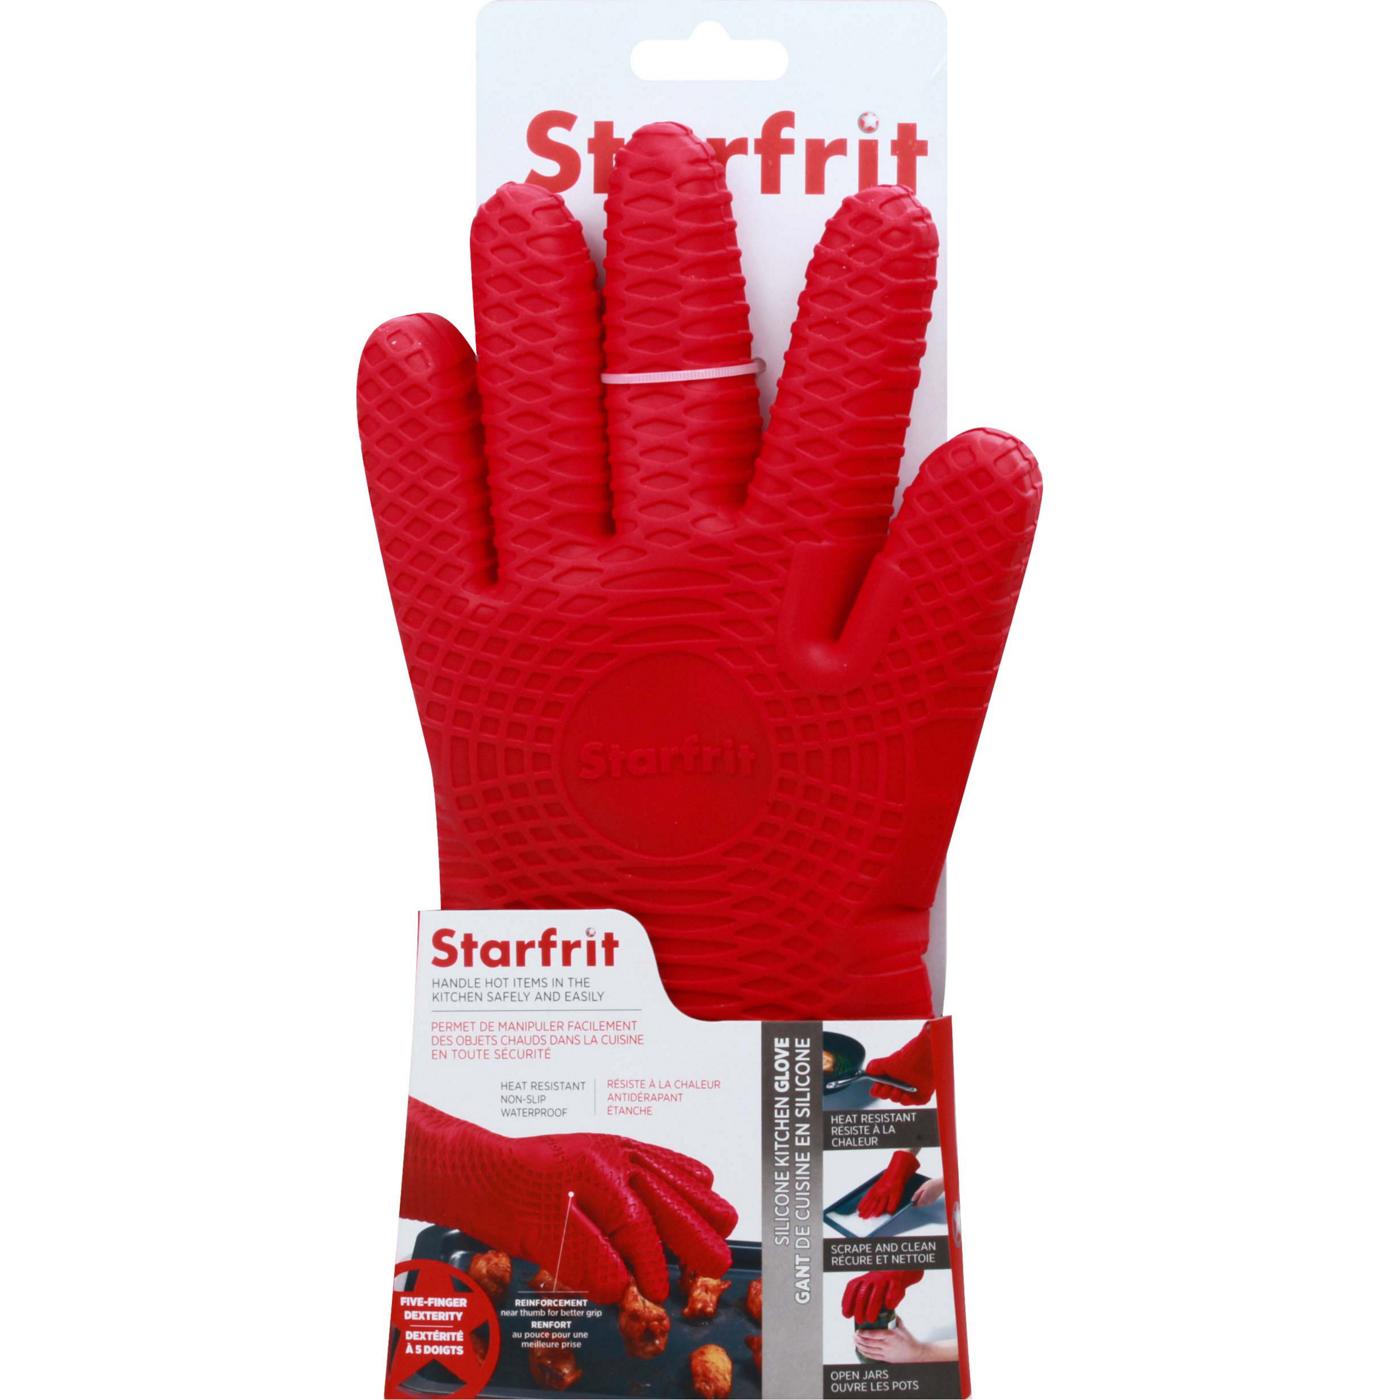 Starfrit Silicone Oven Glove; image 1 of 2